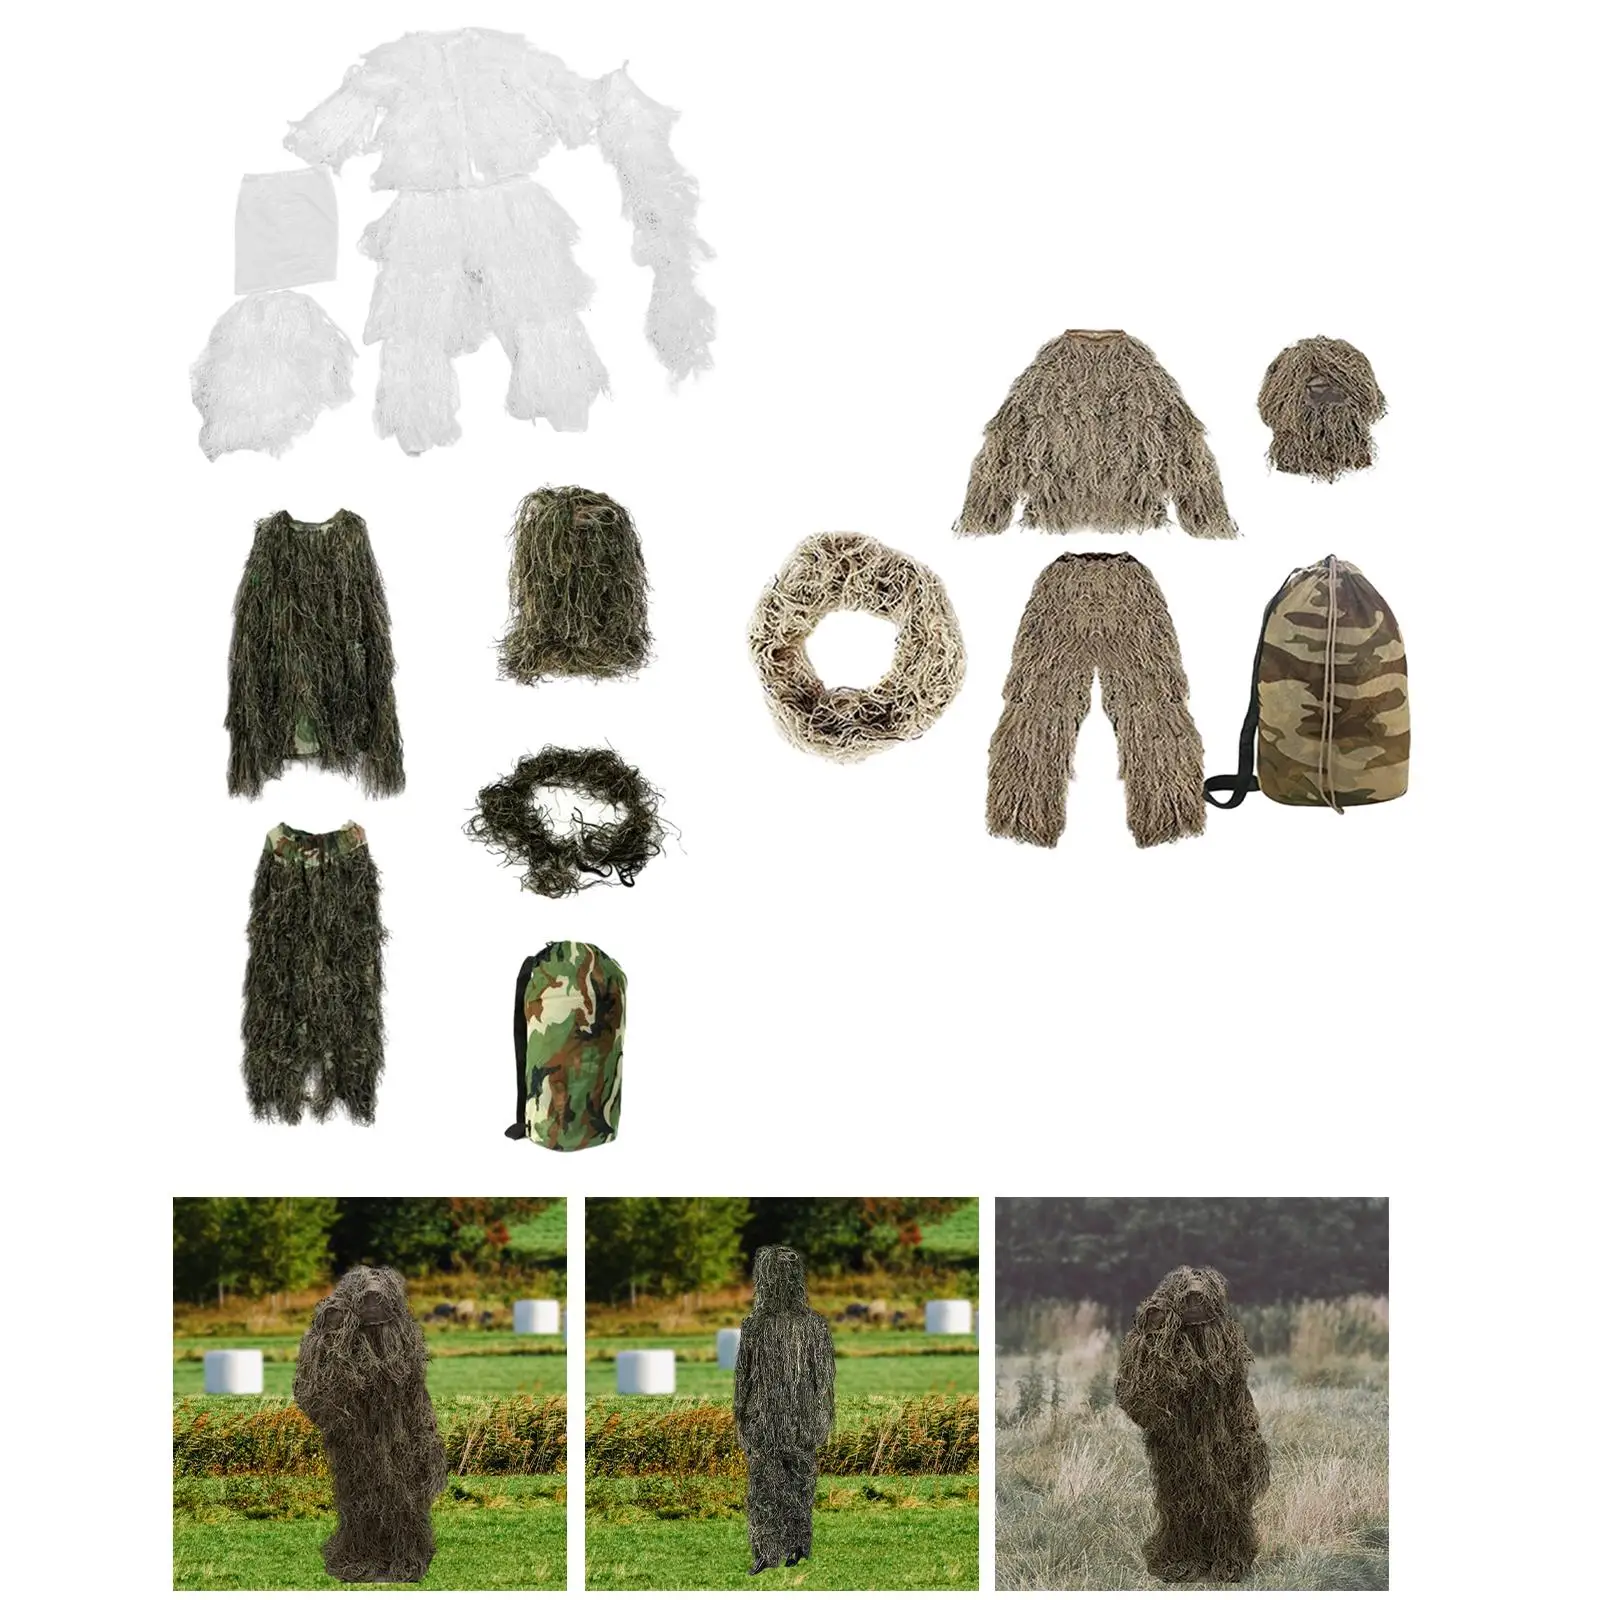 Kids Ghillie Suit Apparel Fancy Dress Disguise Jacket Clothes Outfit Pants Clothing for Game Photography Outdoor Jungle Hunting